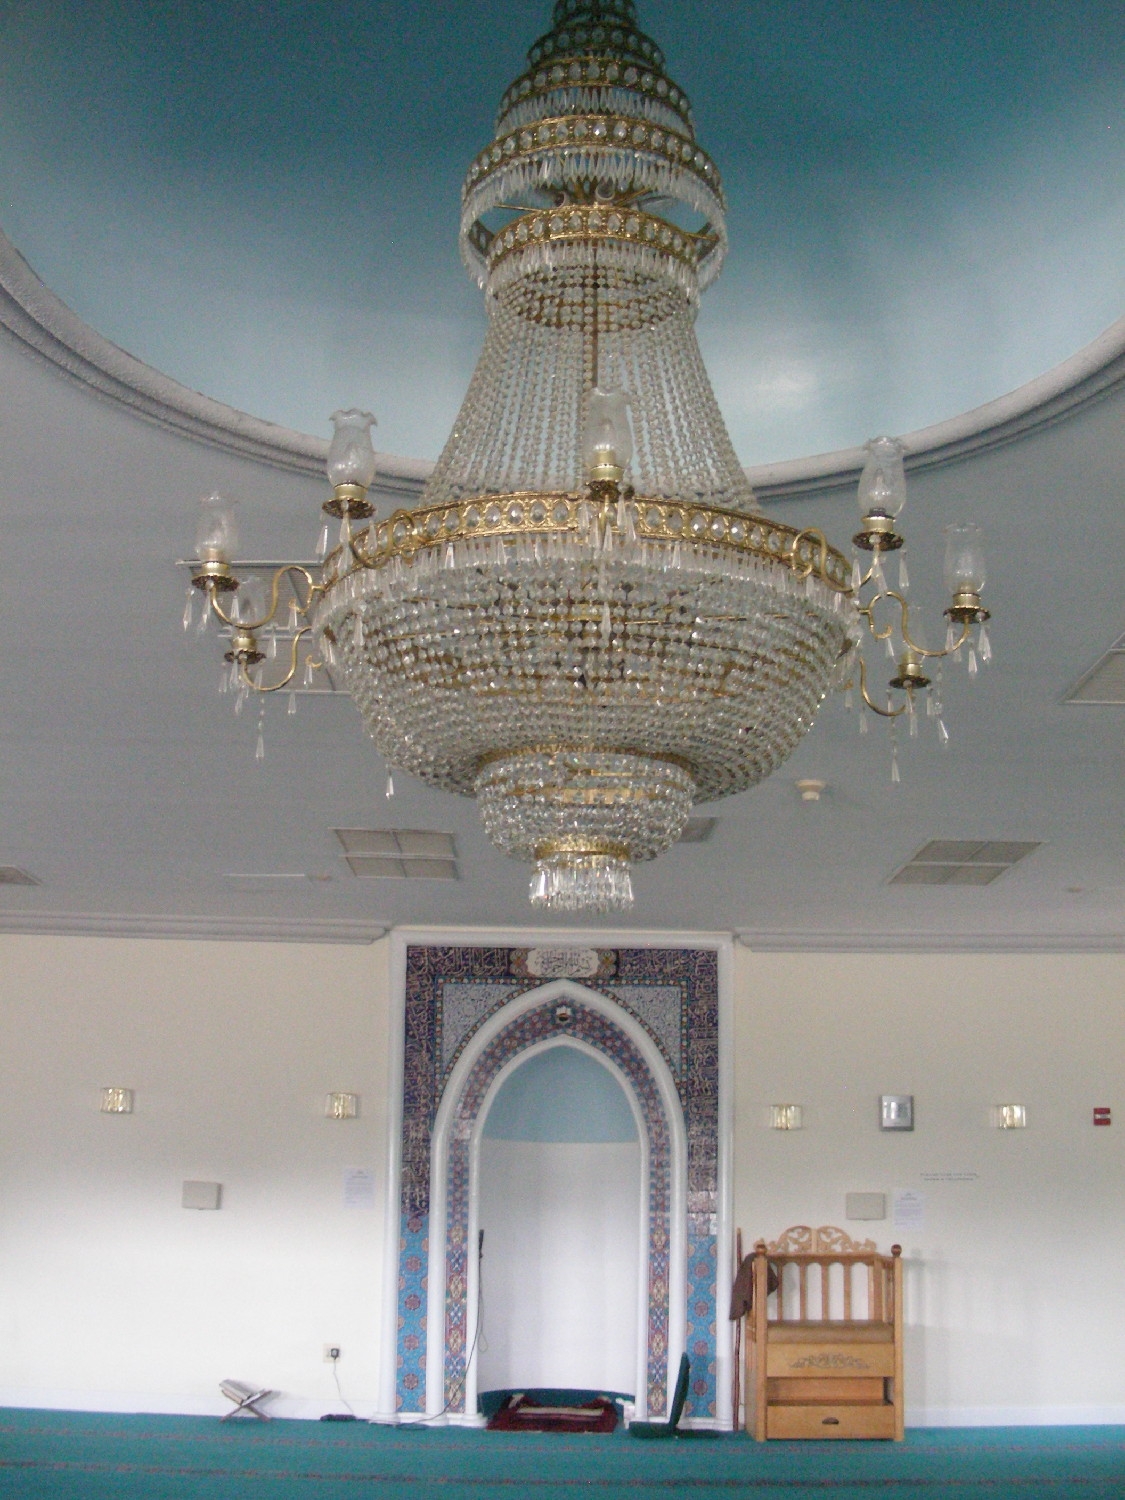 Prayer hall dome and chandelier, looking towards qibla wall